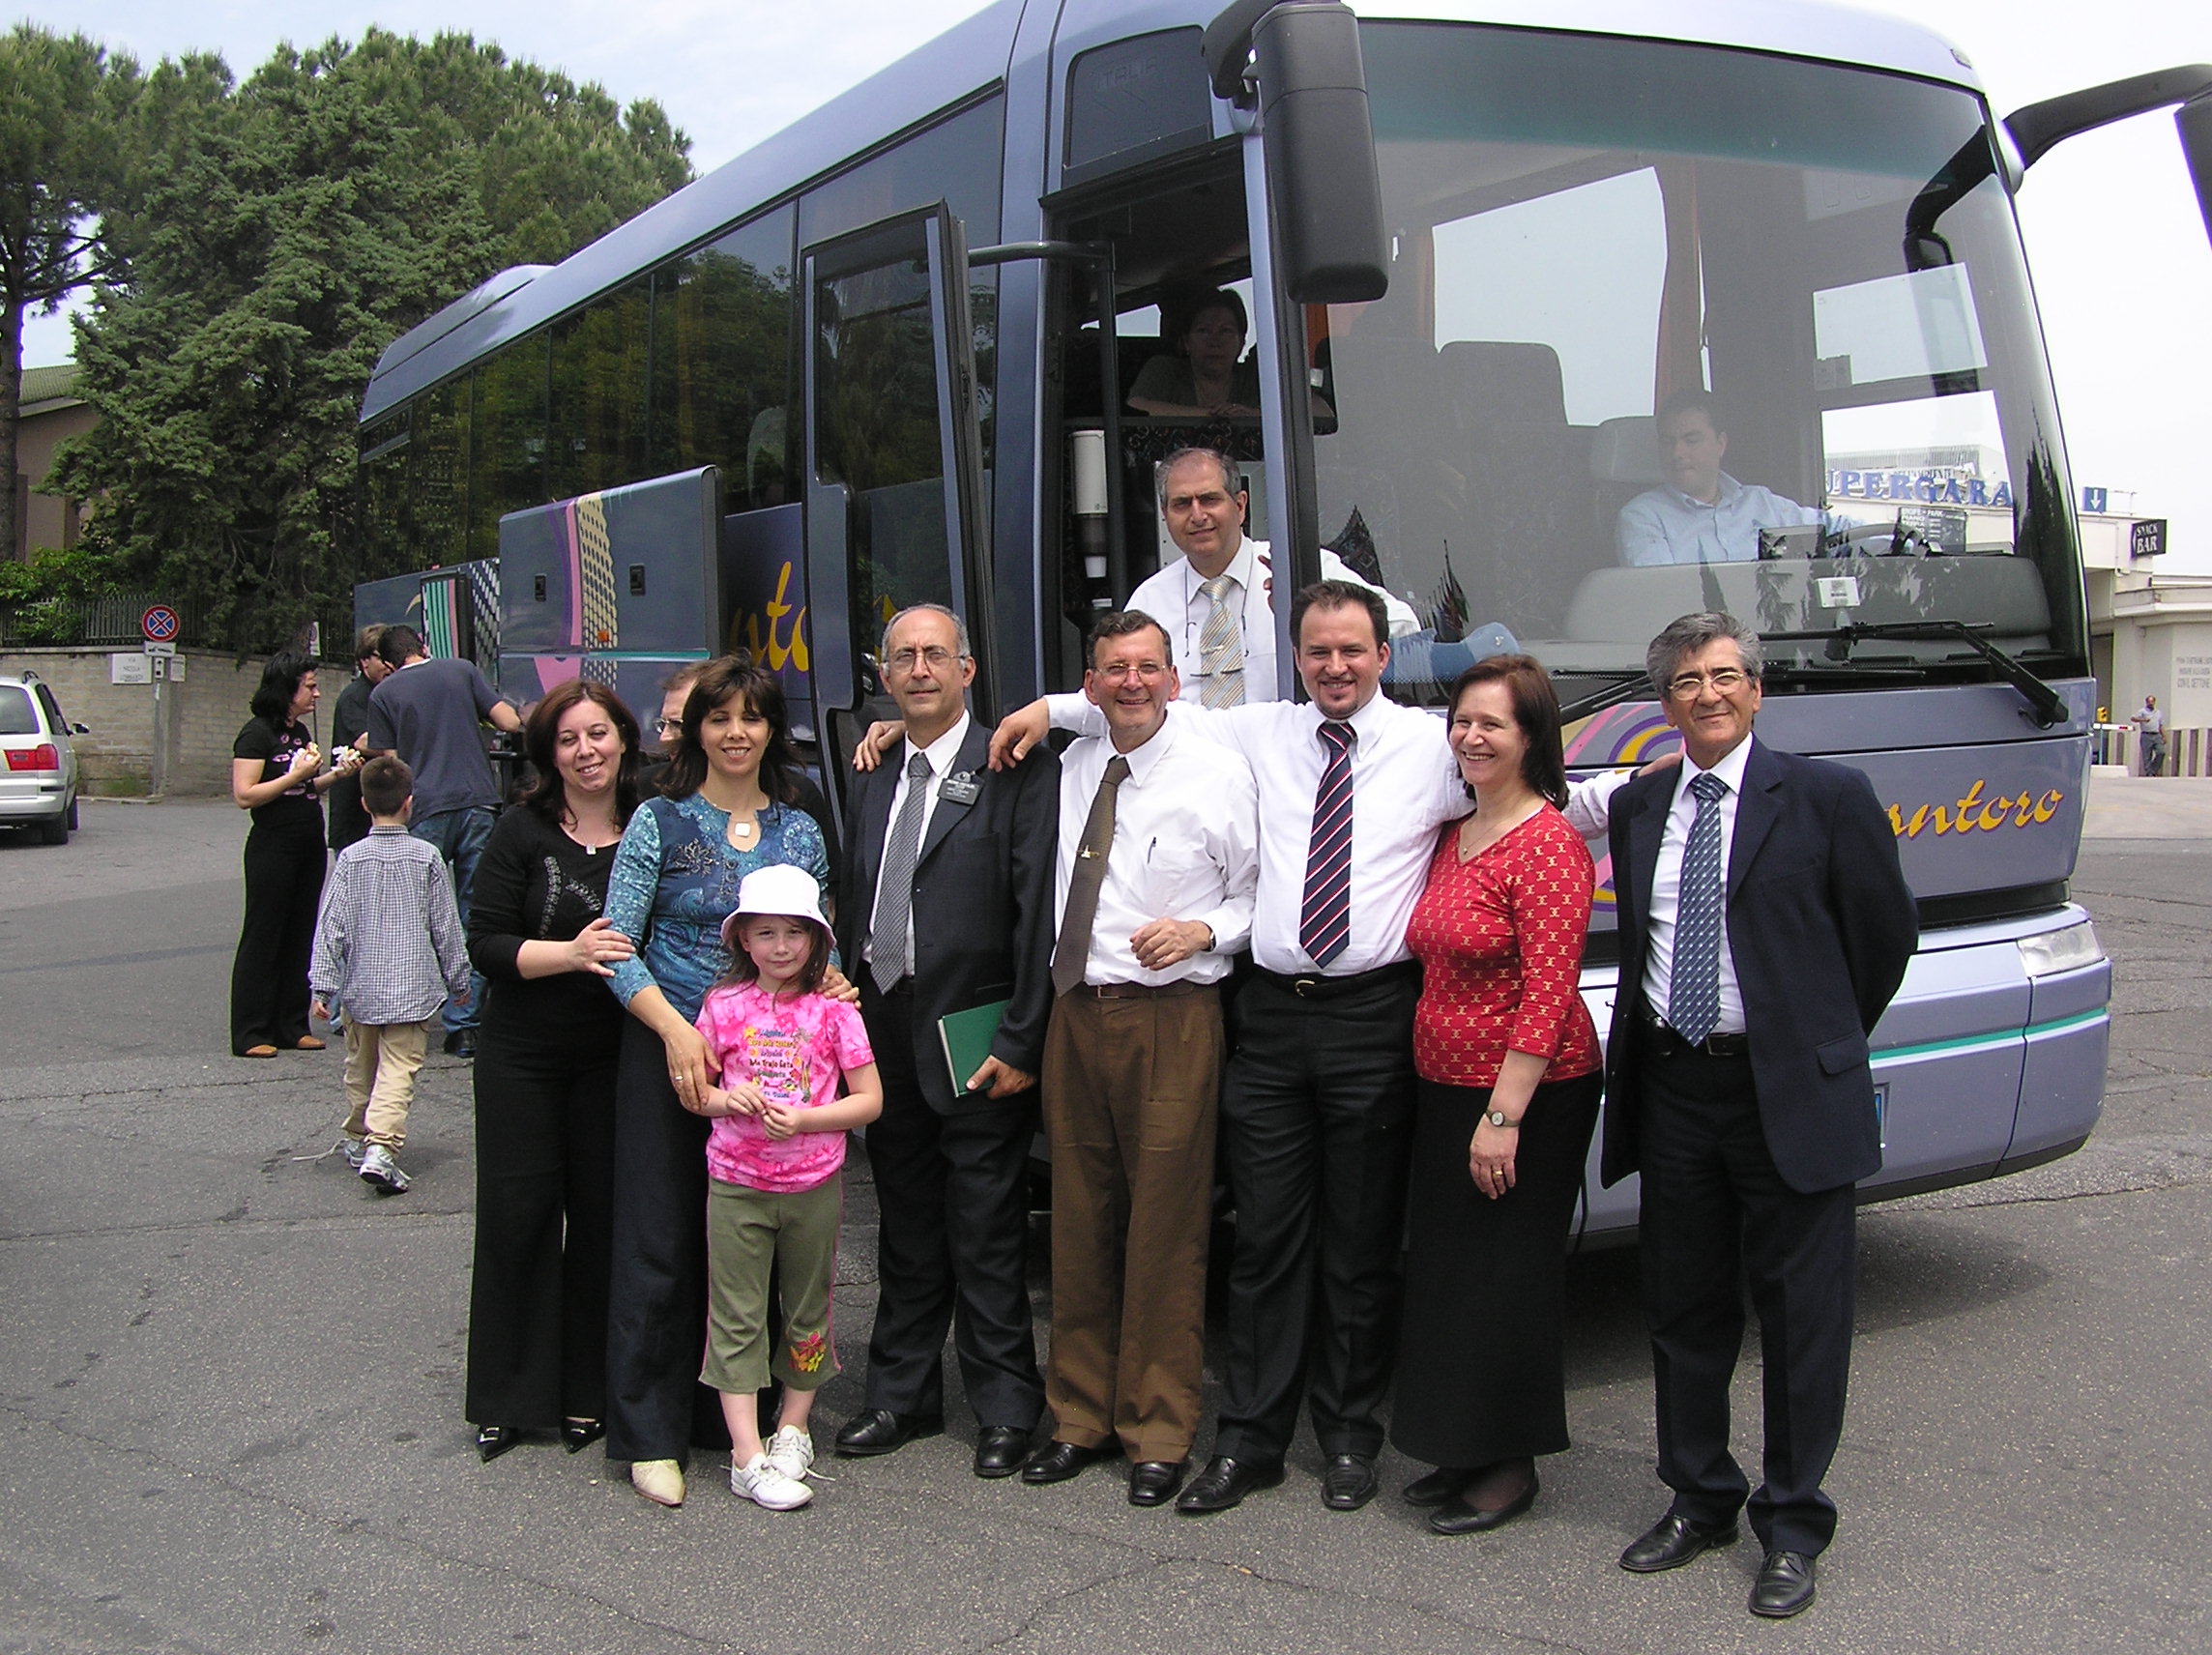 members in front of a bus